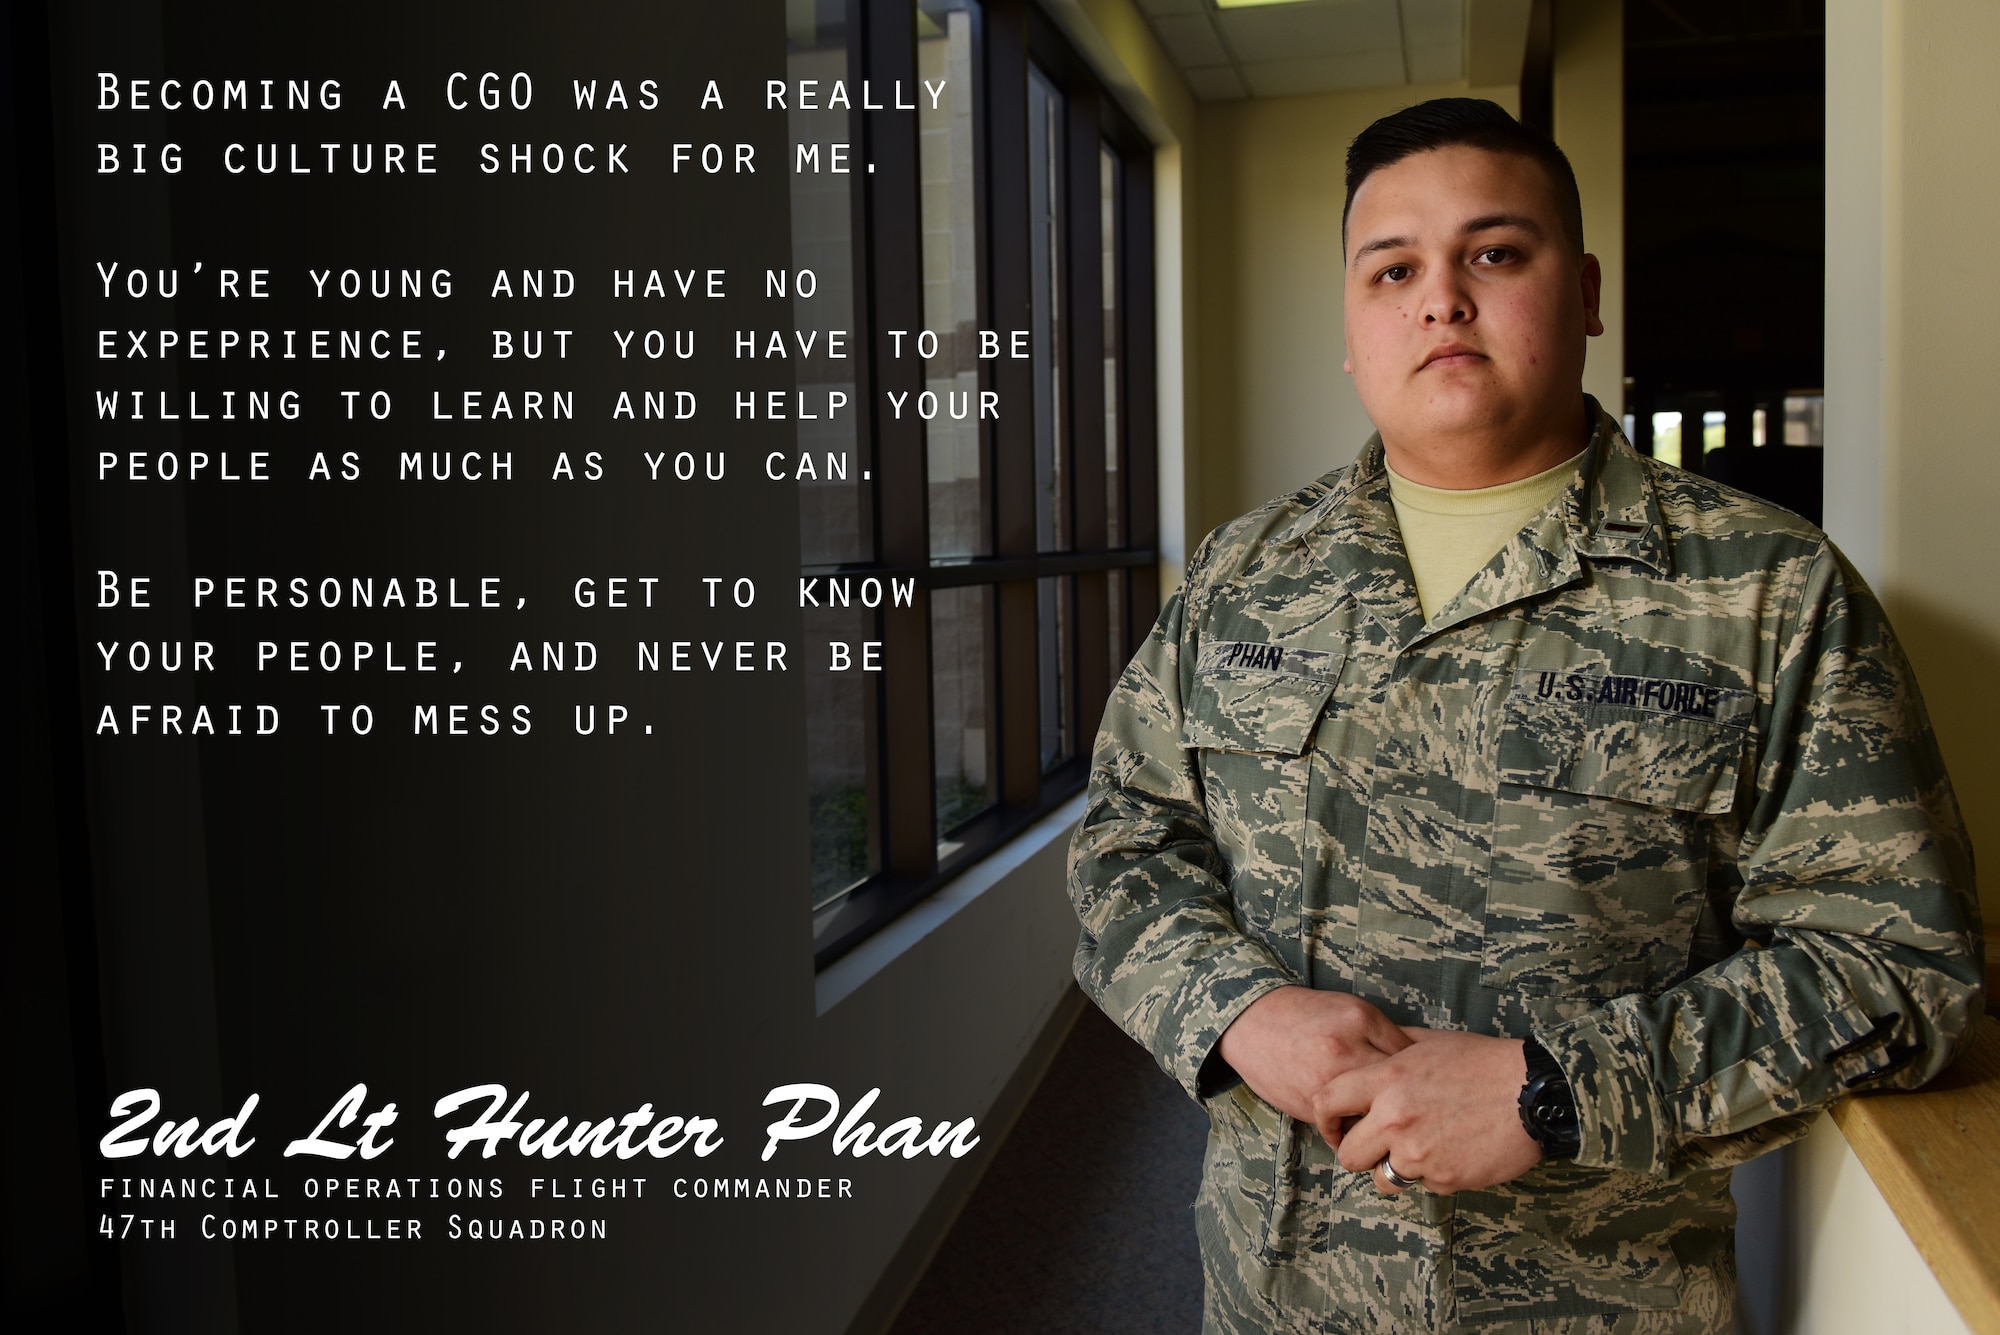 Second Lt. Hunter Phan, 47th Comptroller Squadron financial operations flight commander, has wanted to serve in the military since he was little, with both his mother and father serving before him on the enlisted side. “Becoming a company-grade officer was a really big culture shock for me,” Phan said. “You’re young and have no experience, but you have to be willing to learn and help your people as much as you can.” For his fellow Airmen and young leaders, he urges to never shy away from advice. “You can’t be scared to ask questions or you will never learn your craft. You just need to roll with the punches and learn from your mistakes.” (U.S. Air Force graphic by Senior Airman Benjamin N. Valmoja)